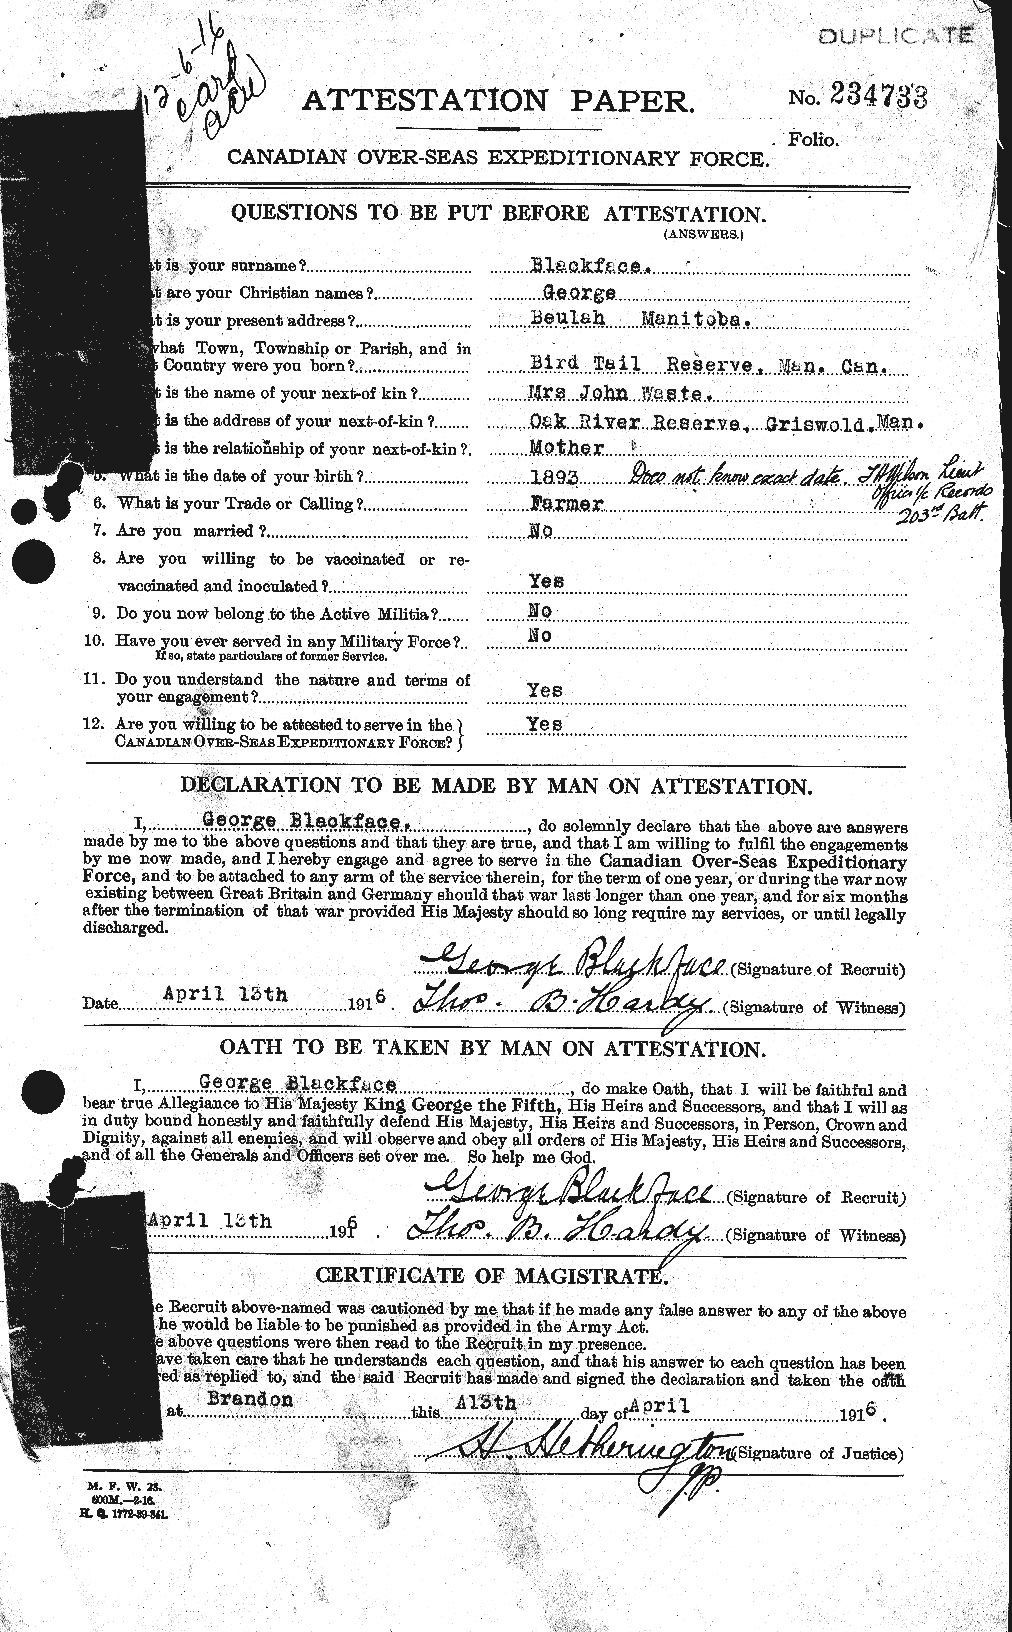 Personnel Records of the First World War - CEF 246460a